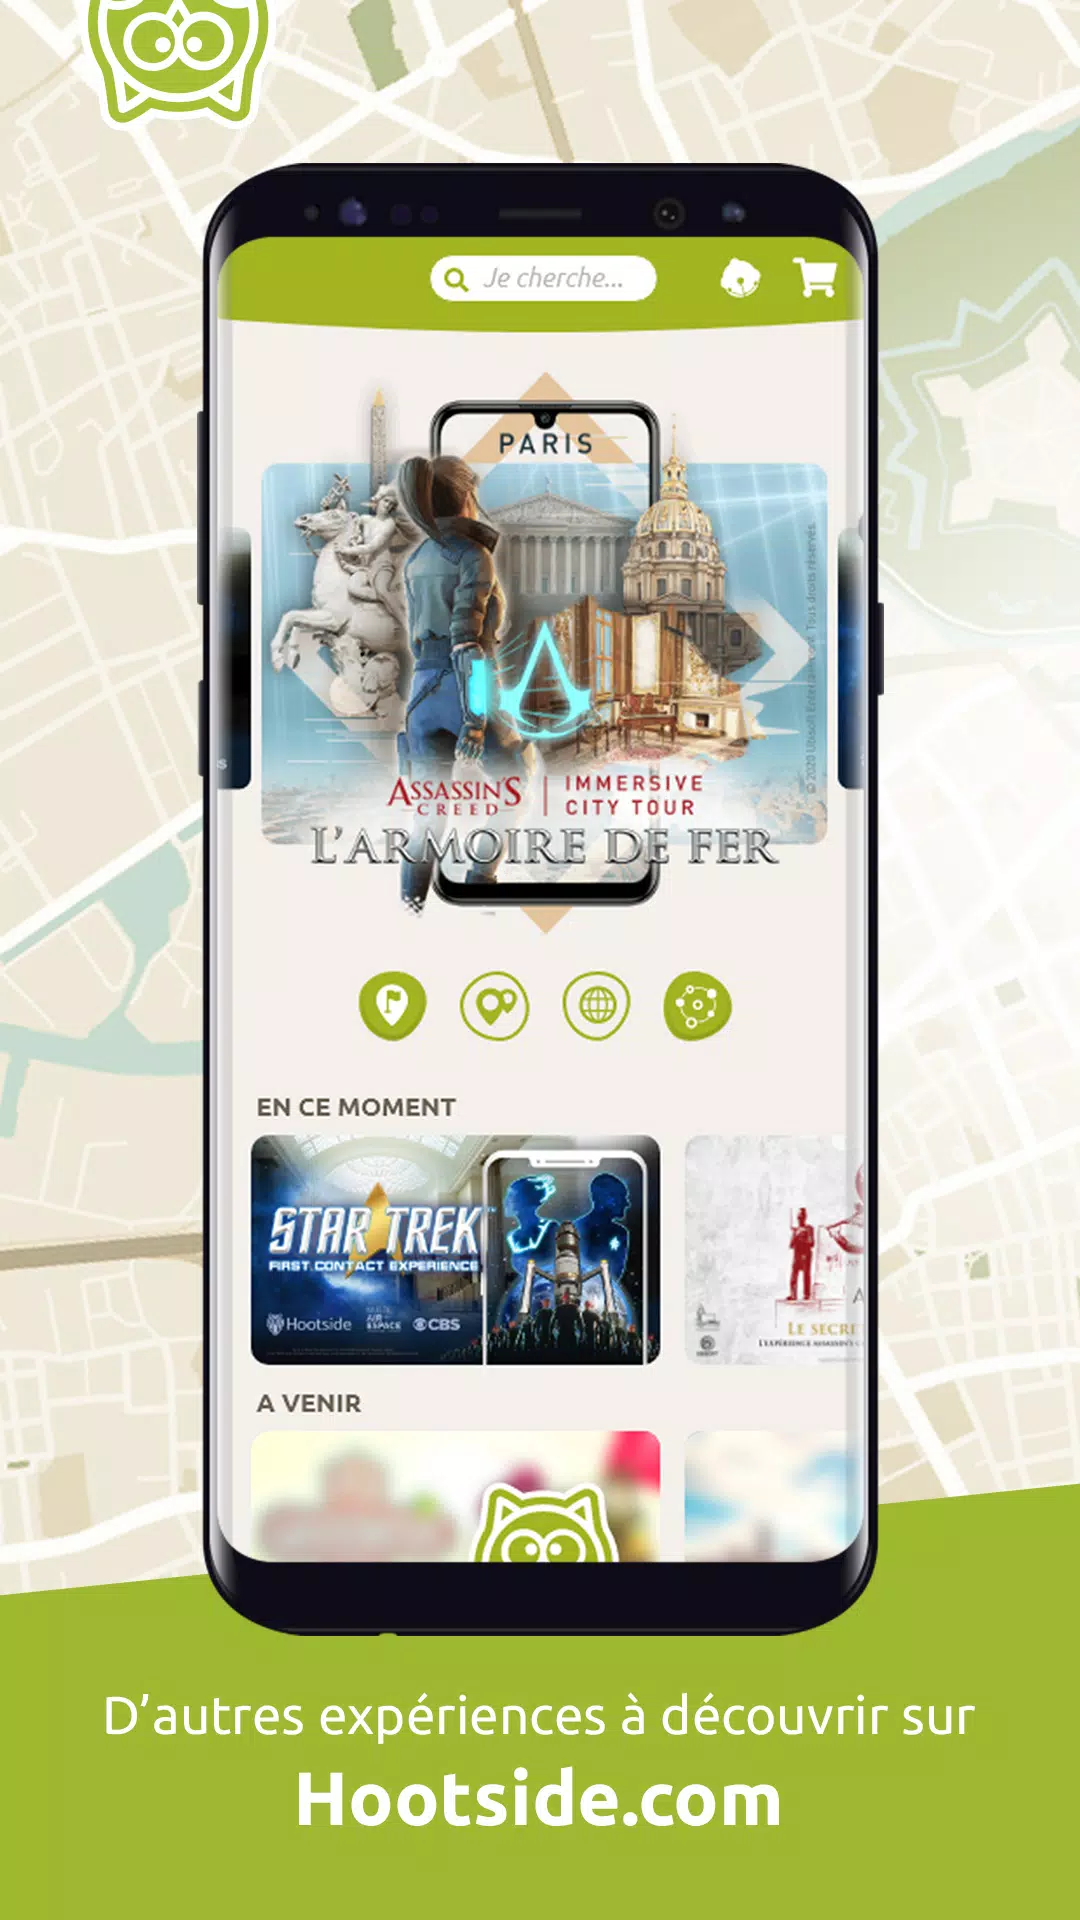 Assassin's Creed : L'Armoire de Fer for Android - APK Download